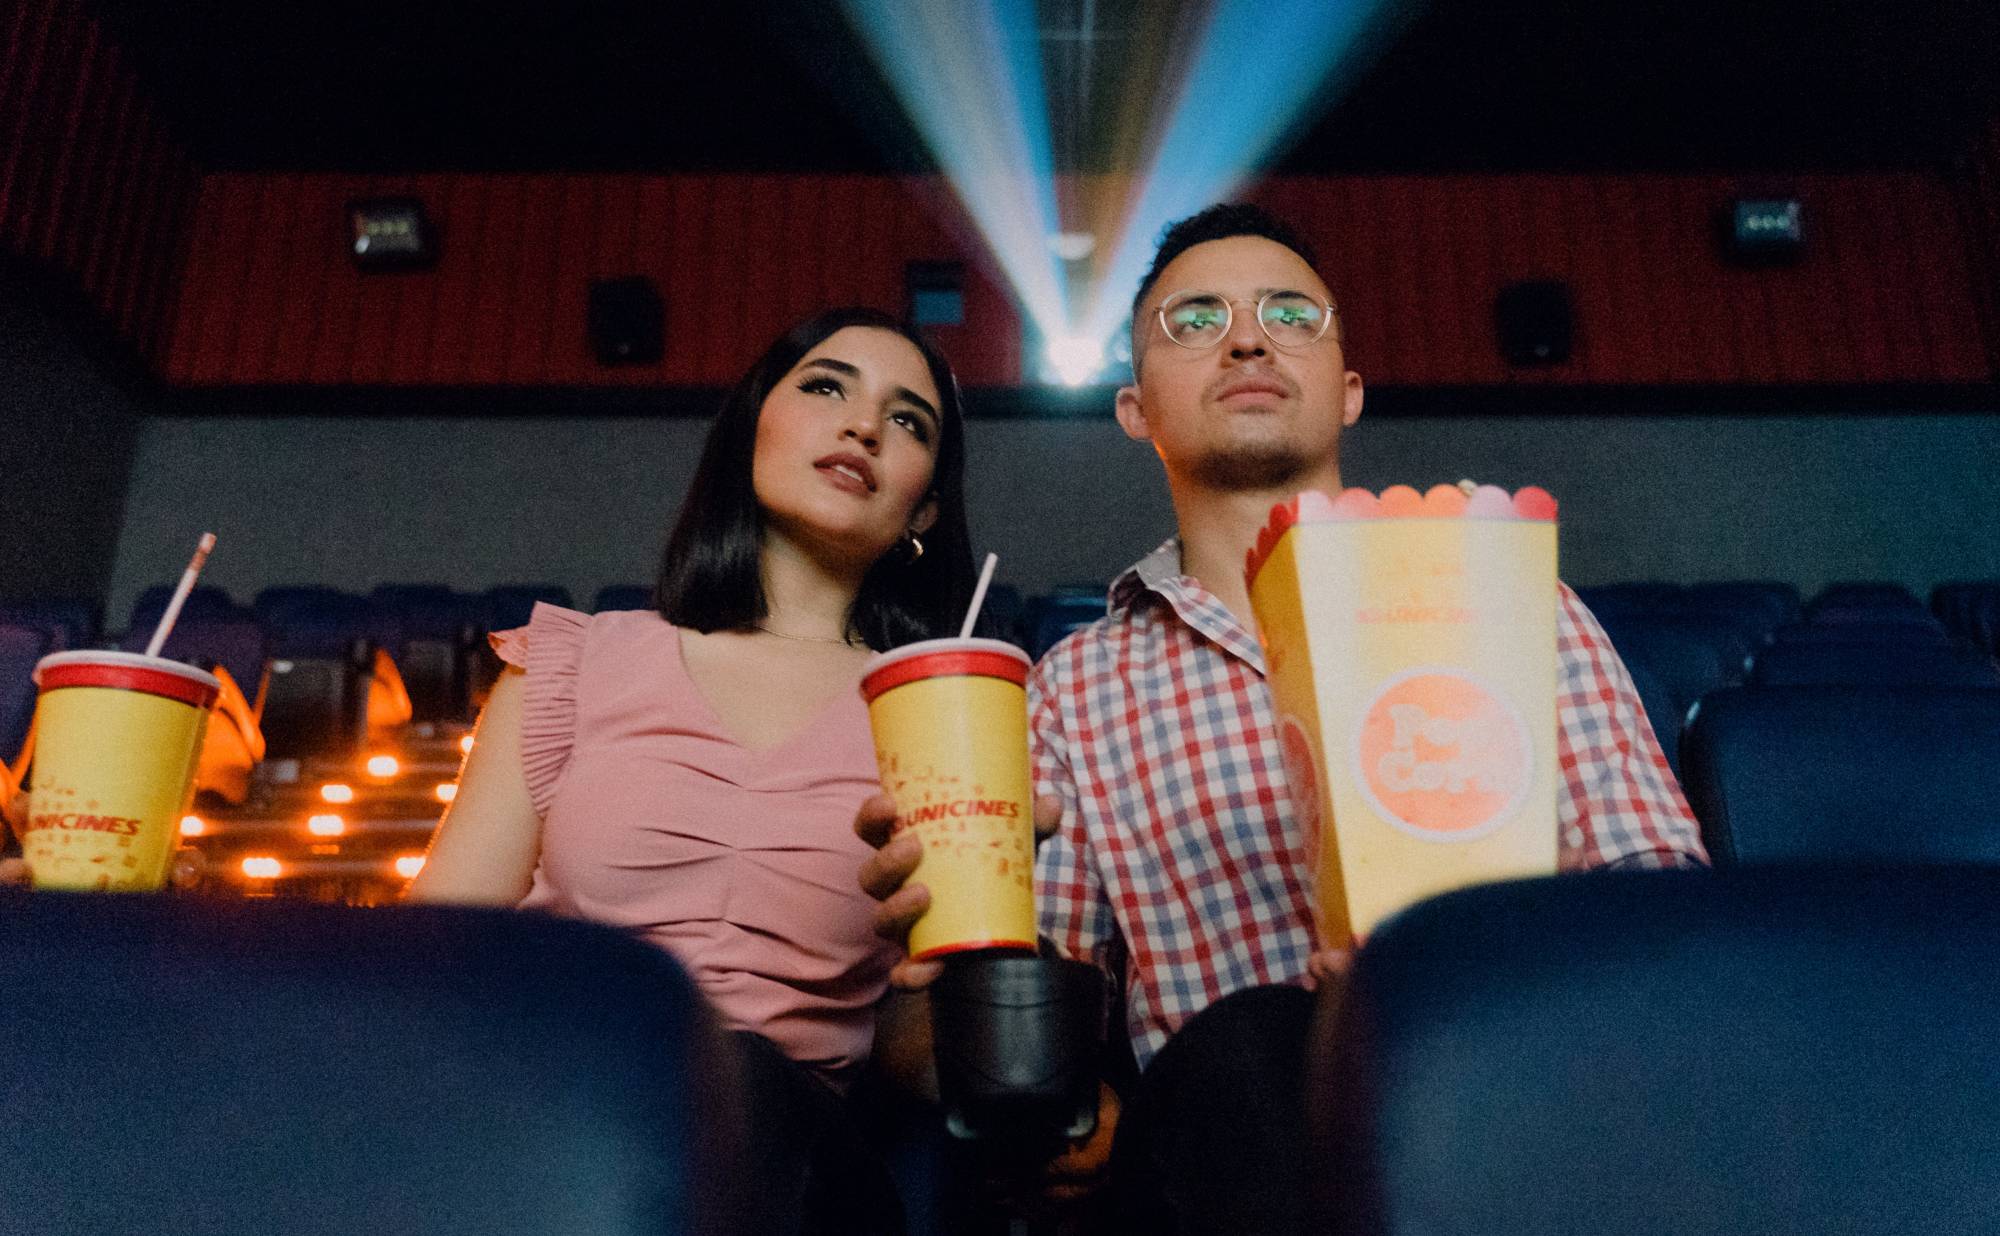 Two people sit watching a movie in a theater while eating popcorn and drinking soda.